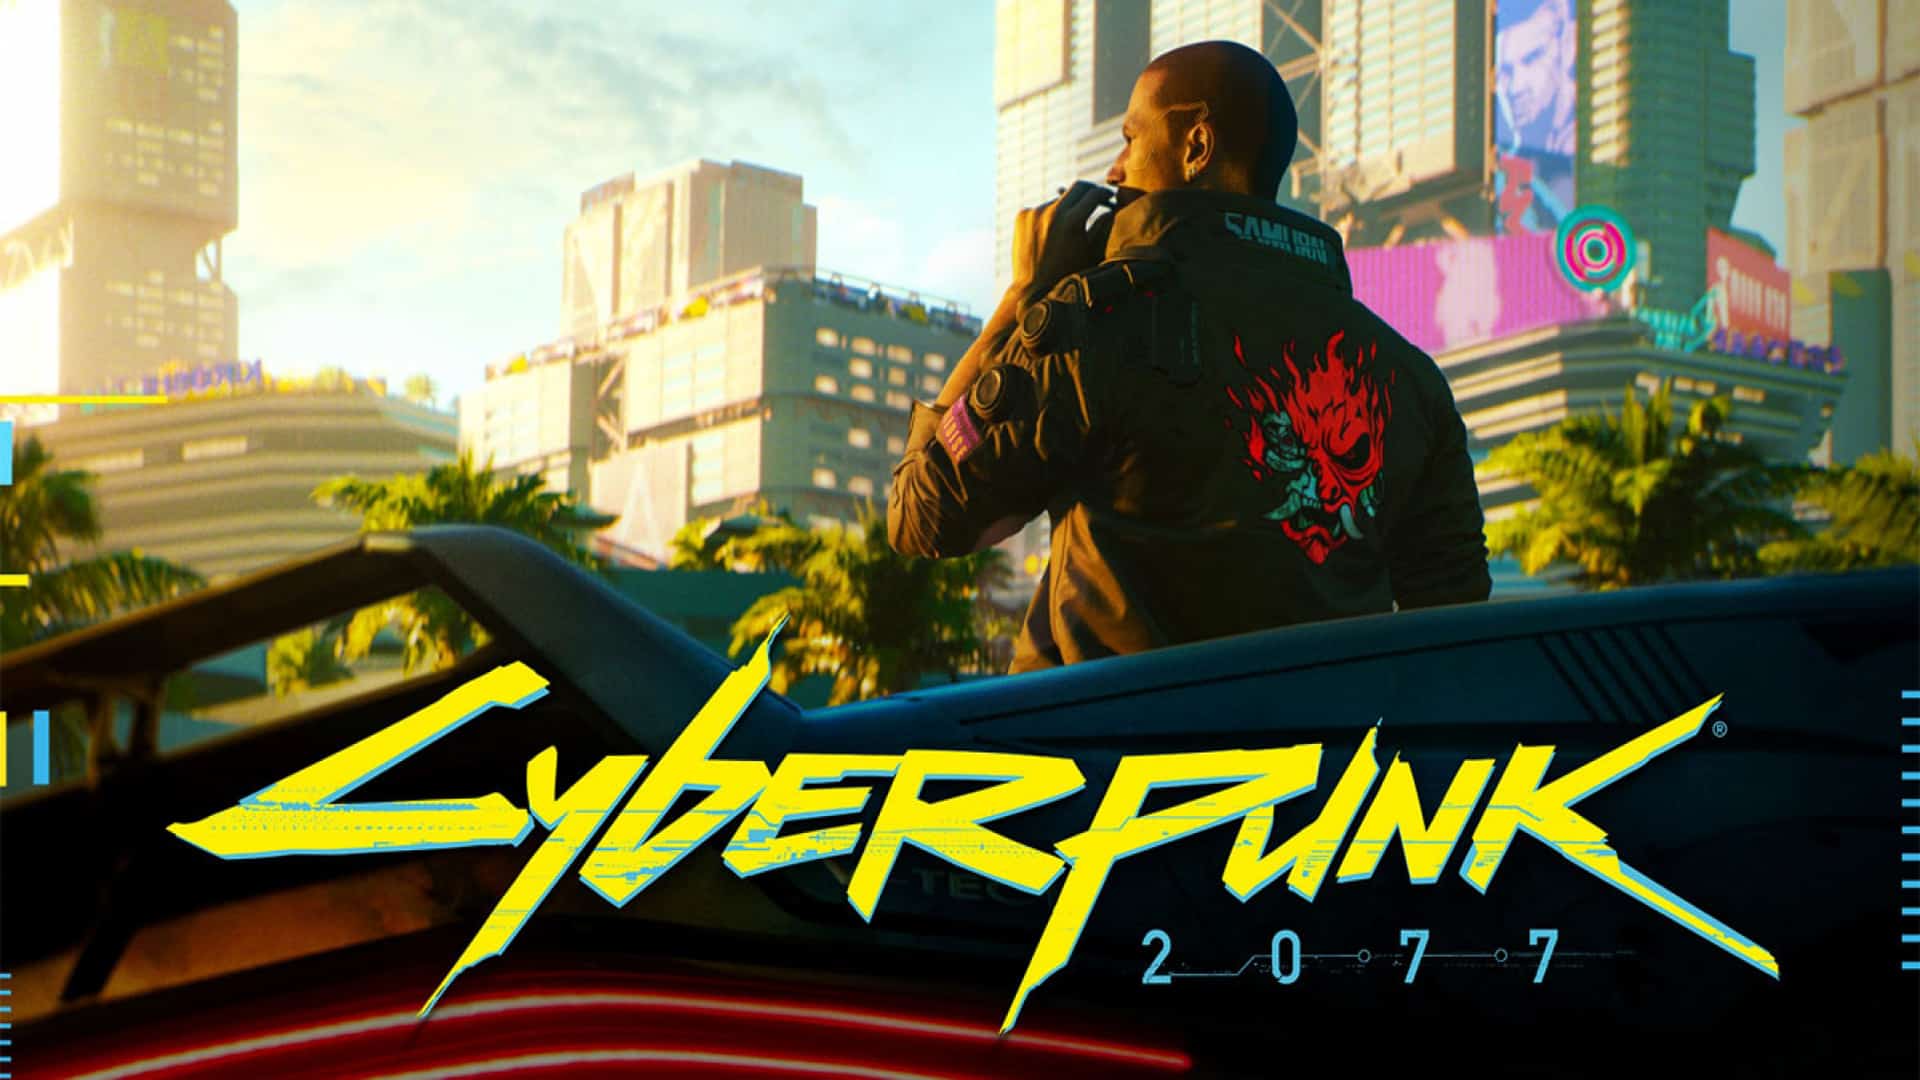 Cyberpunk 2077 smashes Steam and Twitch records in launch day ...